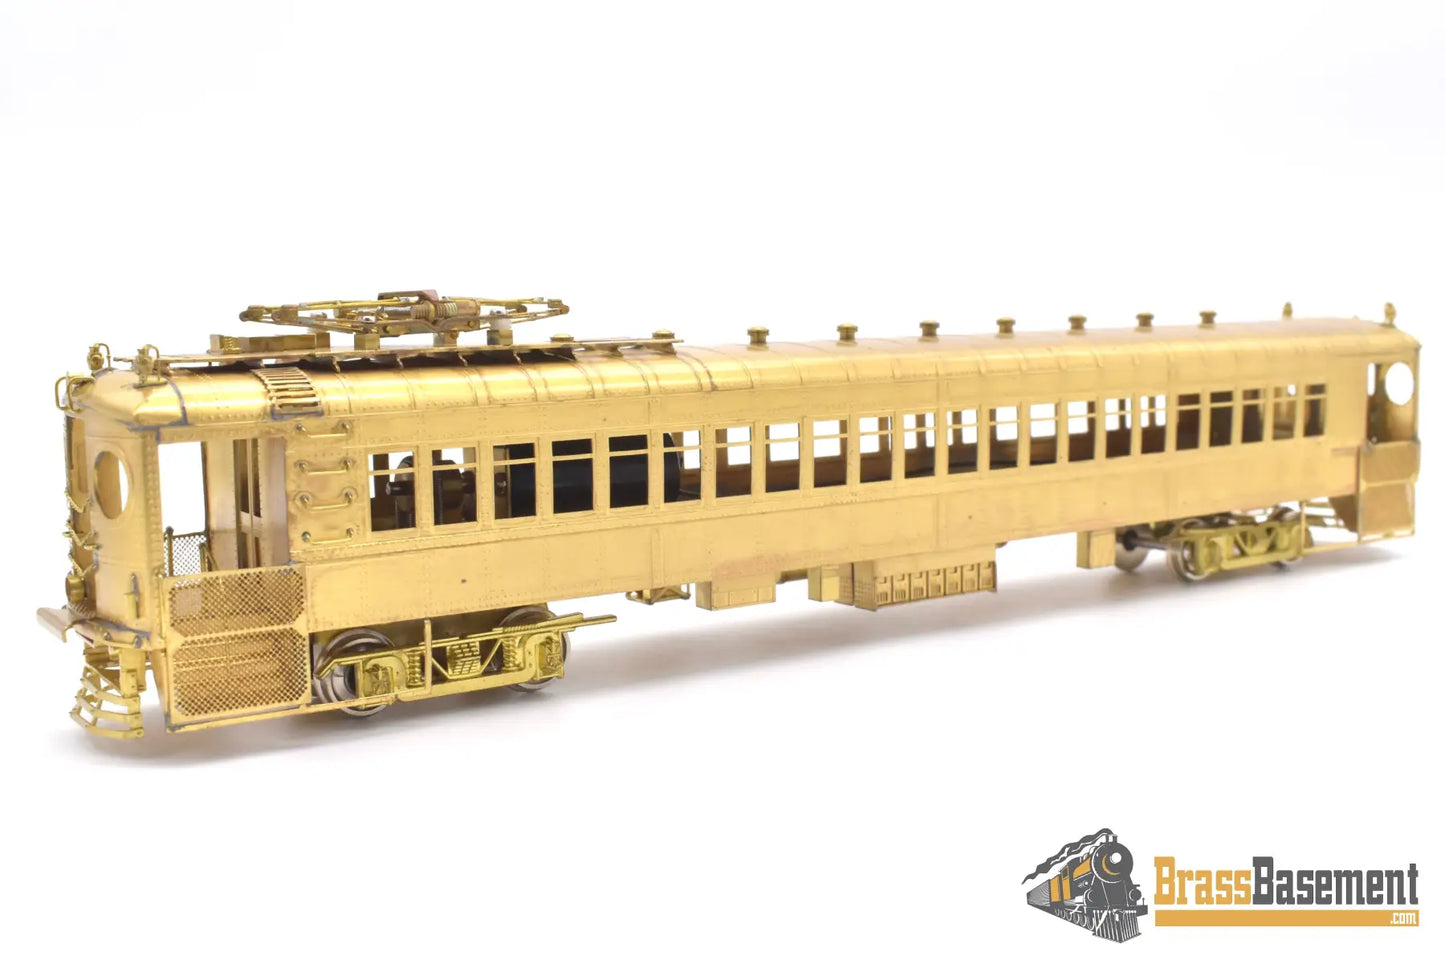 Ho Brass - Hi - Country Southern Pacific Interurban Electric Railway Coach #300 Powered & Trailer